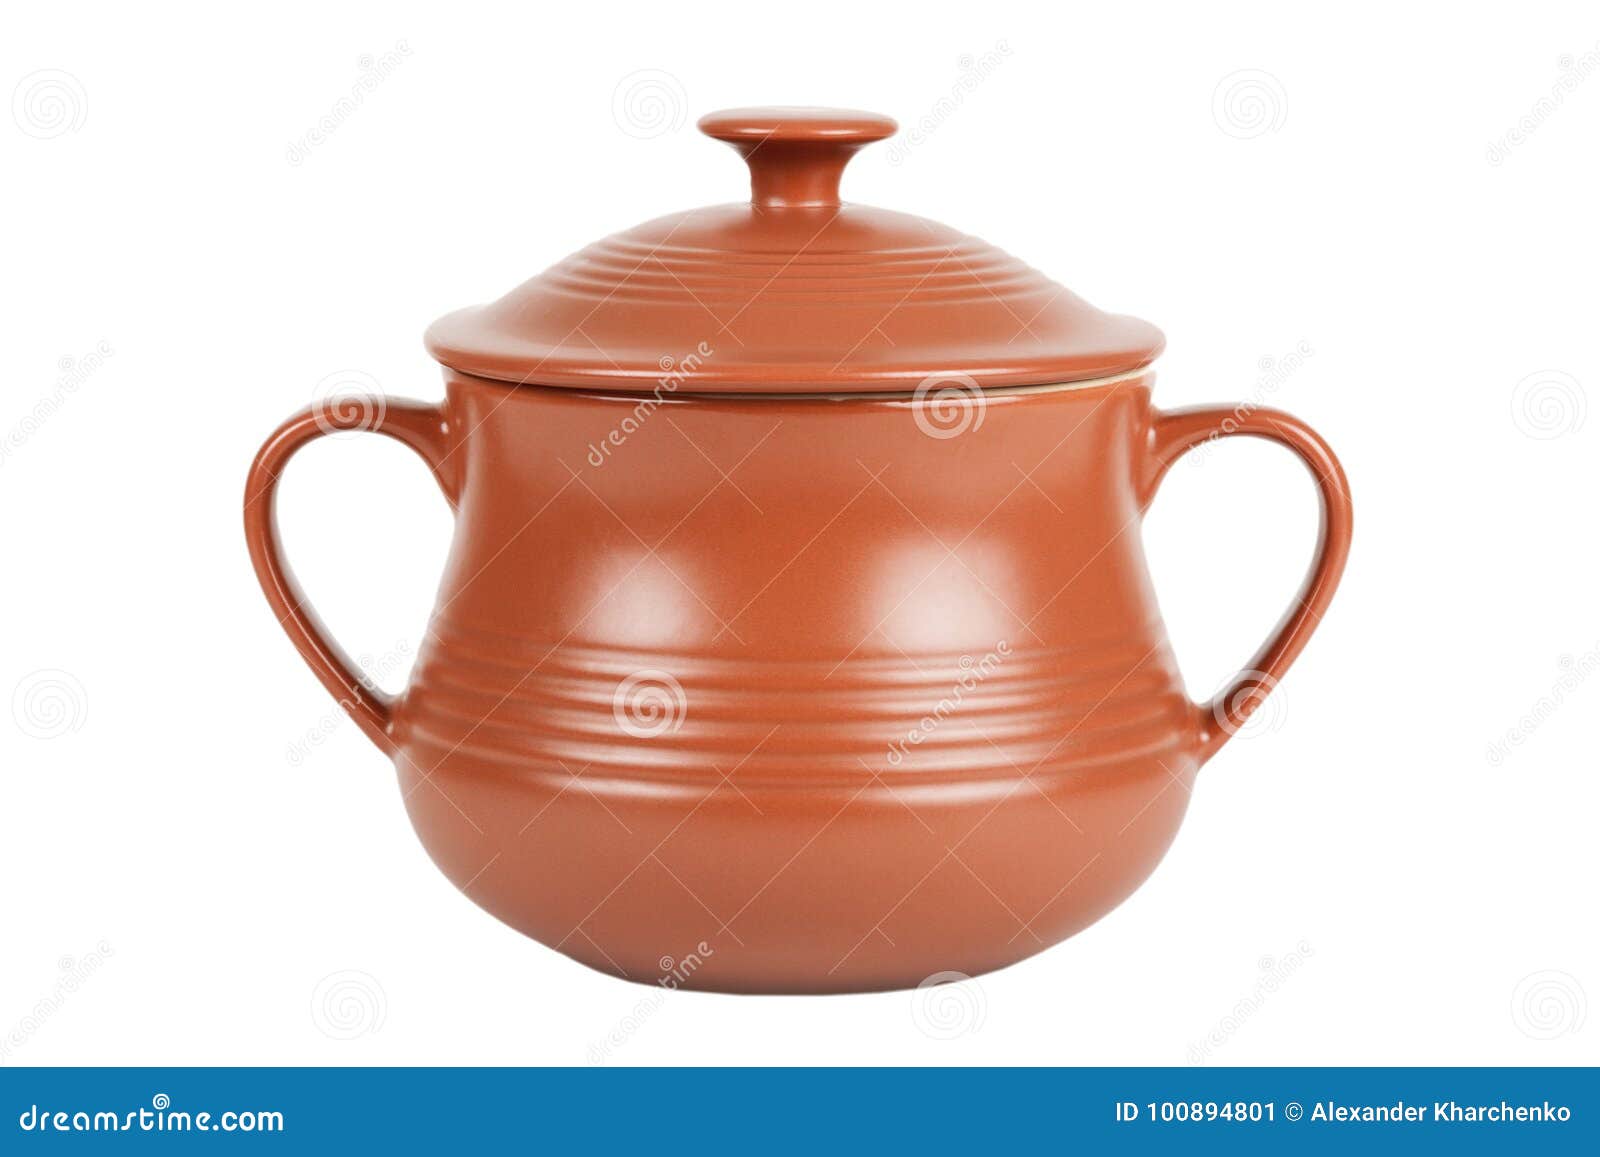 Two Ceramic Cooking Pots On White Background Stock Photo, Picture and  Royalty Free Image. Image 45074387.